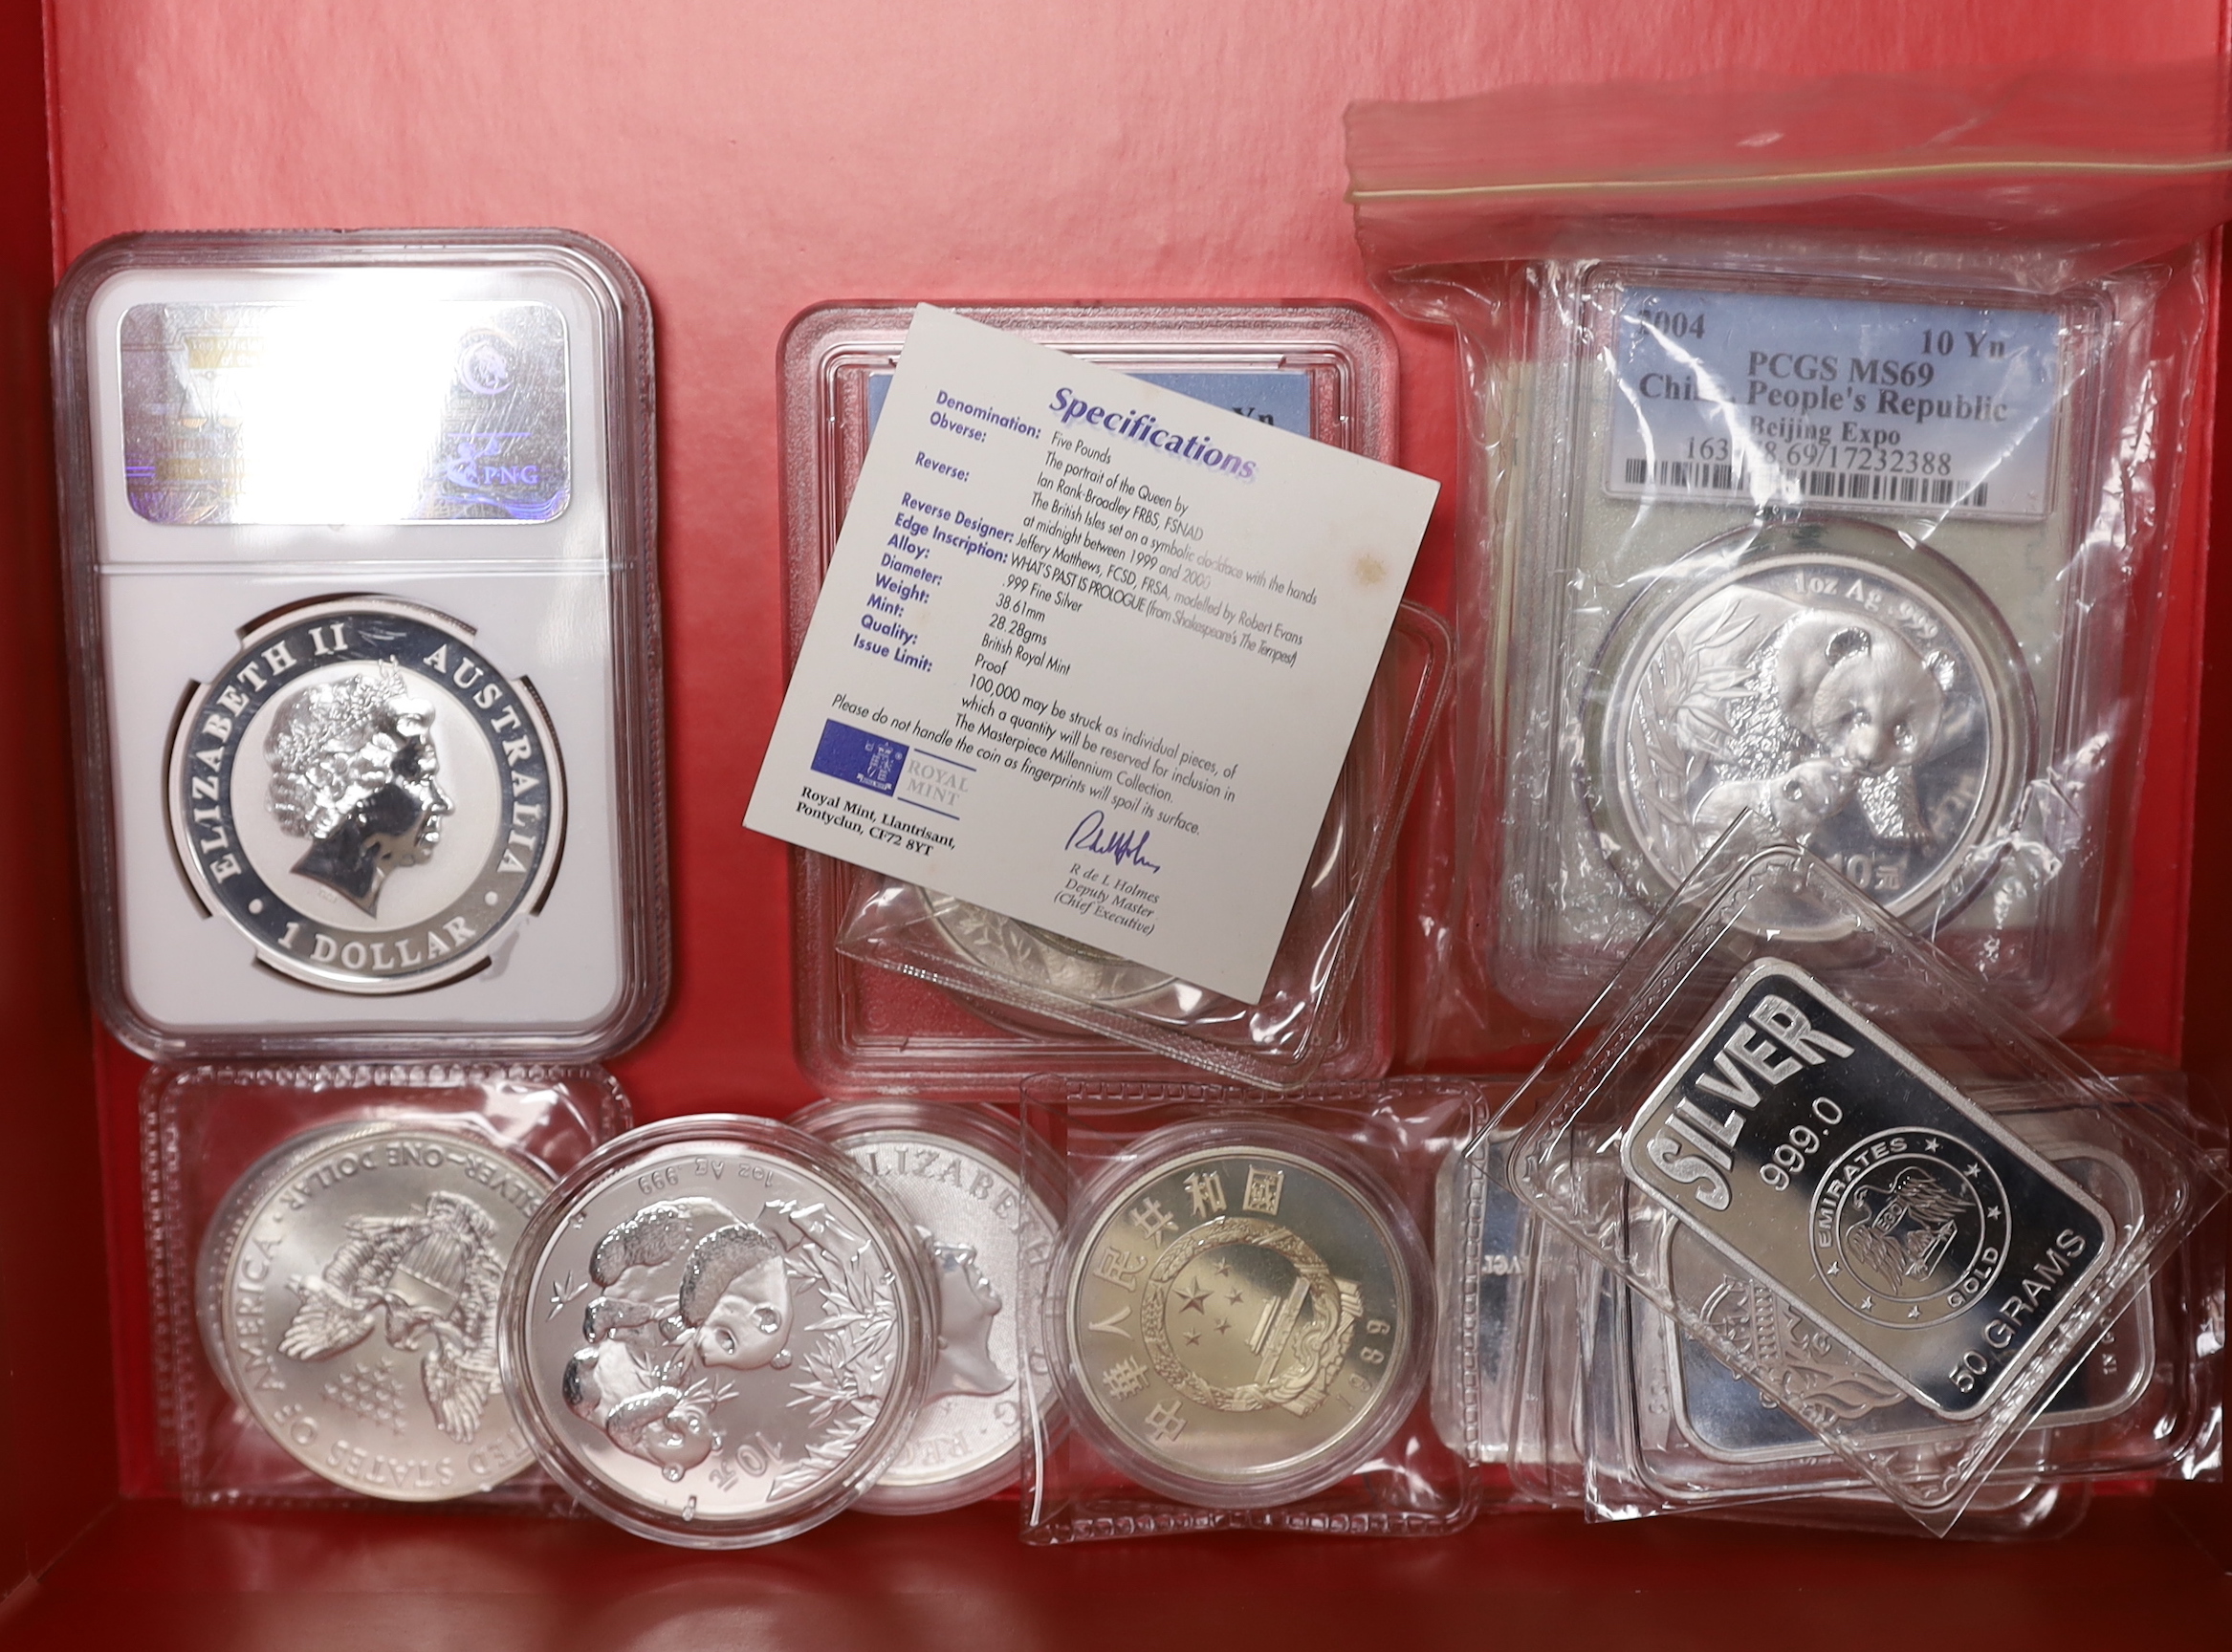 Nineteen silver commemorative coins, medals or silver ingots, including Australia $1 koala 2012p, NGC graded MS 69, People’s Republic China 10 yuan 1995, PCGS graded MS 68 and 10 yuan 2004, PCGS graded MS 69